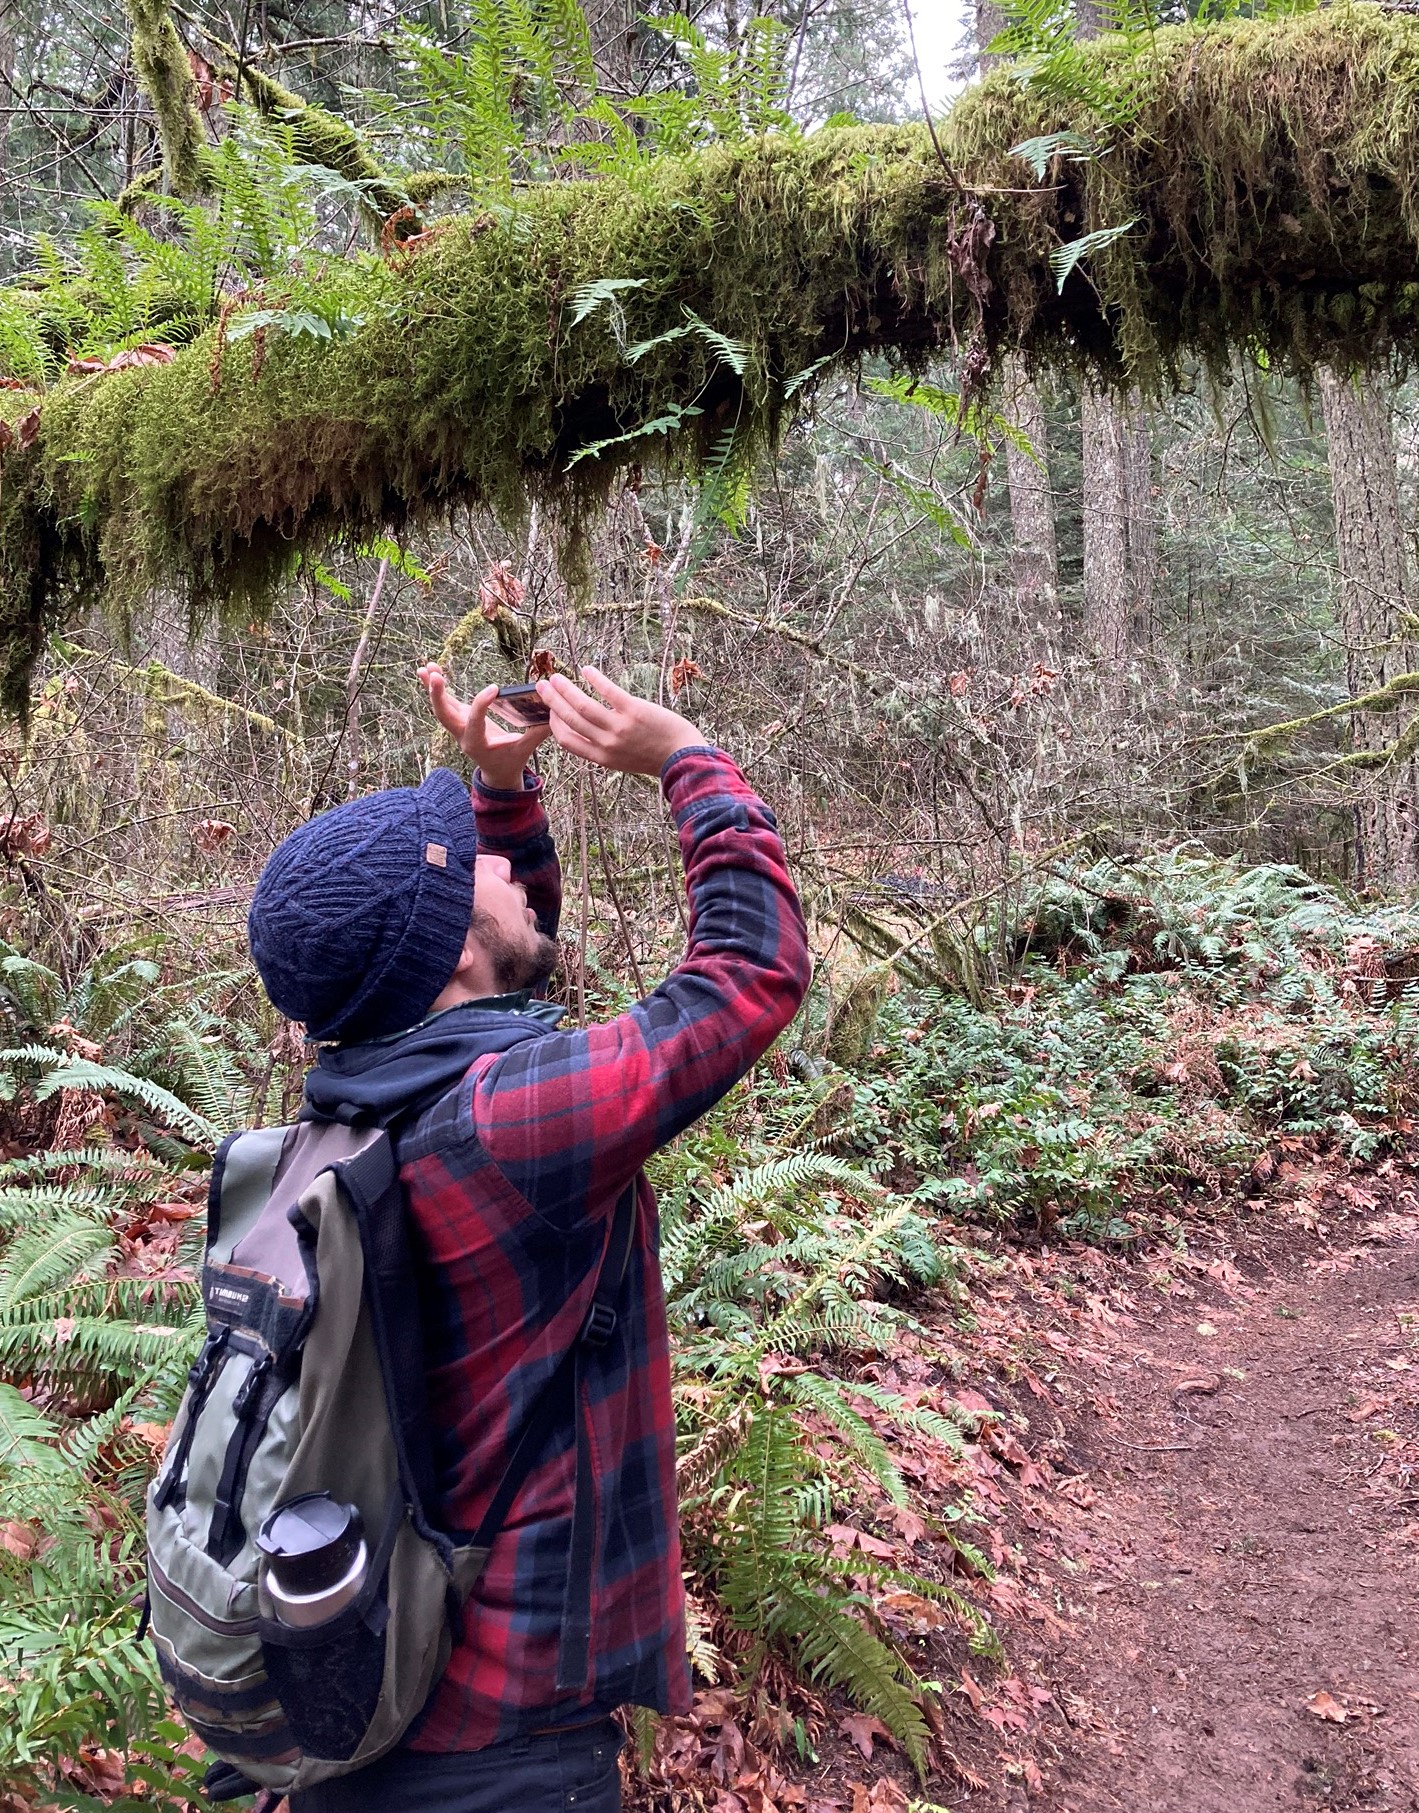 A man wearing a backpack is shown photographing a plant growing on a moss-covered tree above him